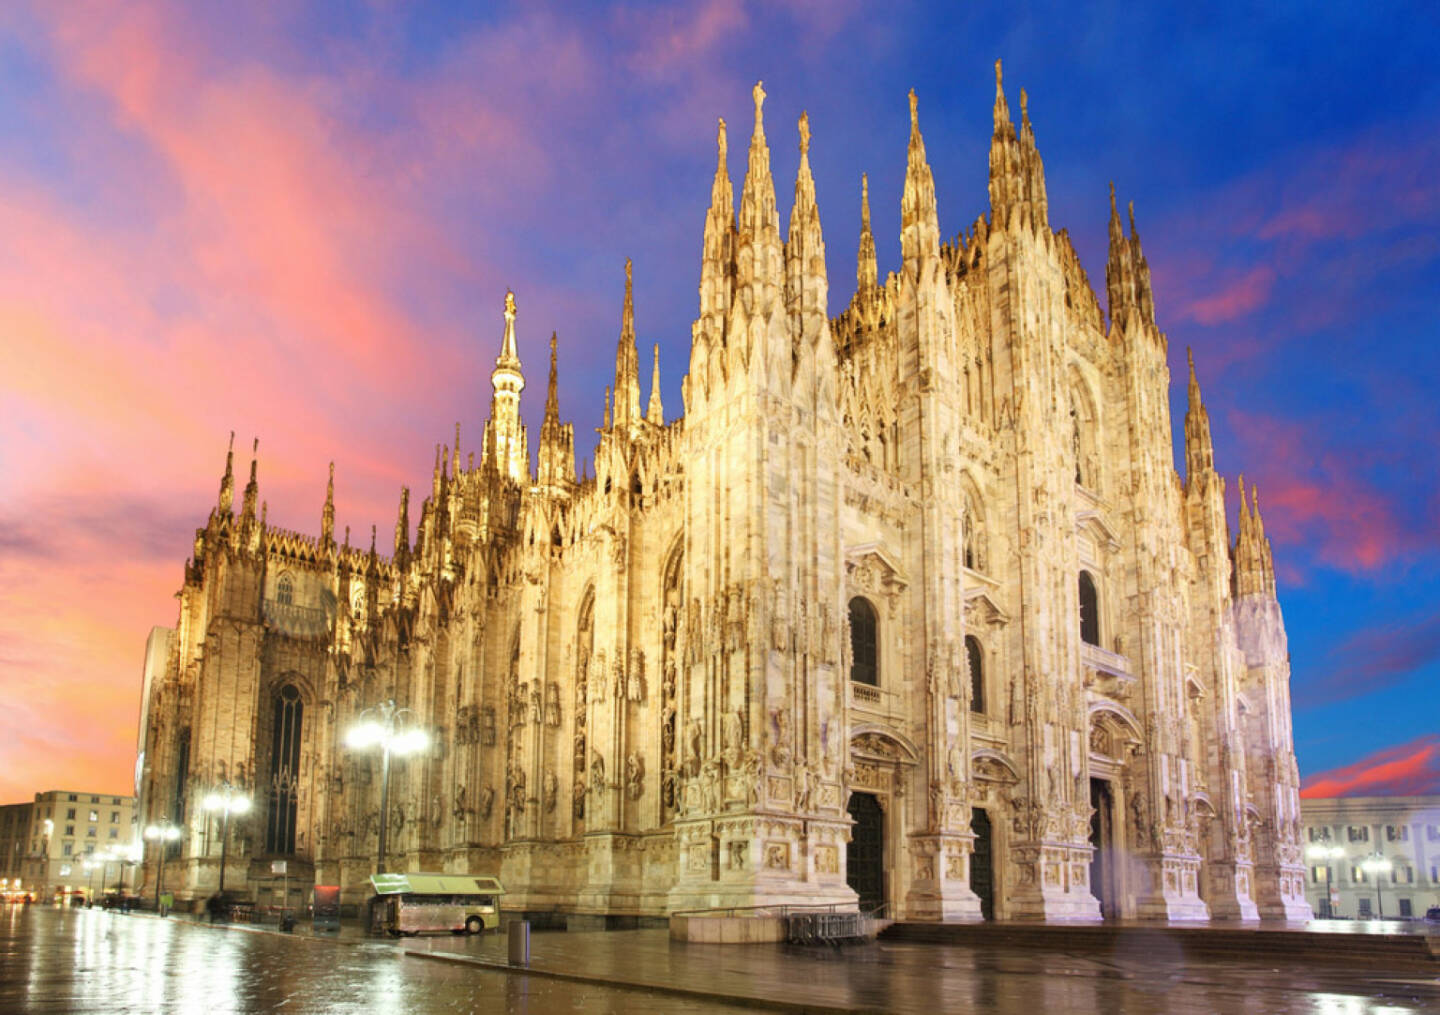 Mailand, Dom, Italien, http://www.shutterstock.com/de/pic-126301181/stock-photo-milan-cathedral-dome-italy.html